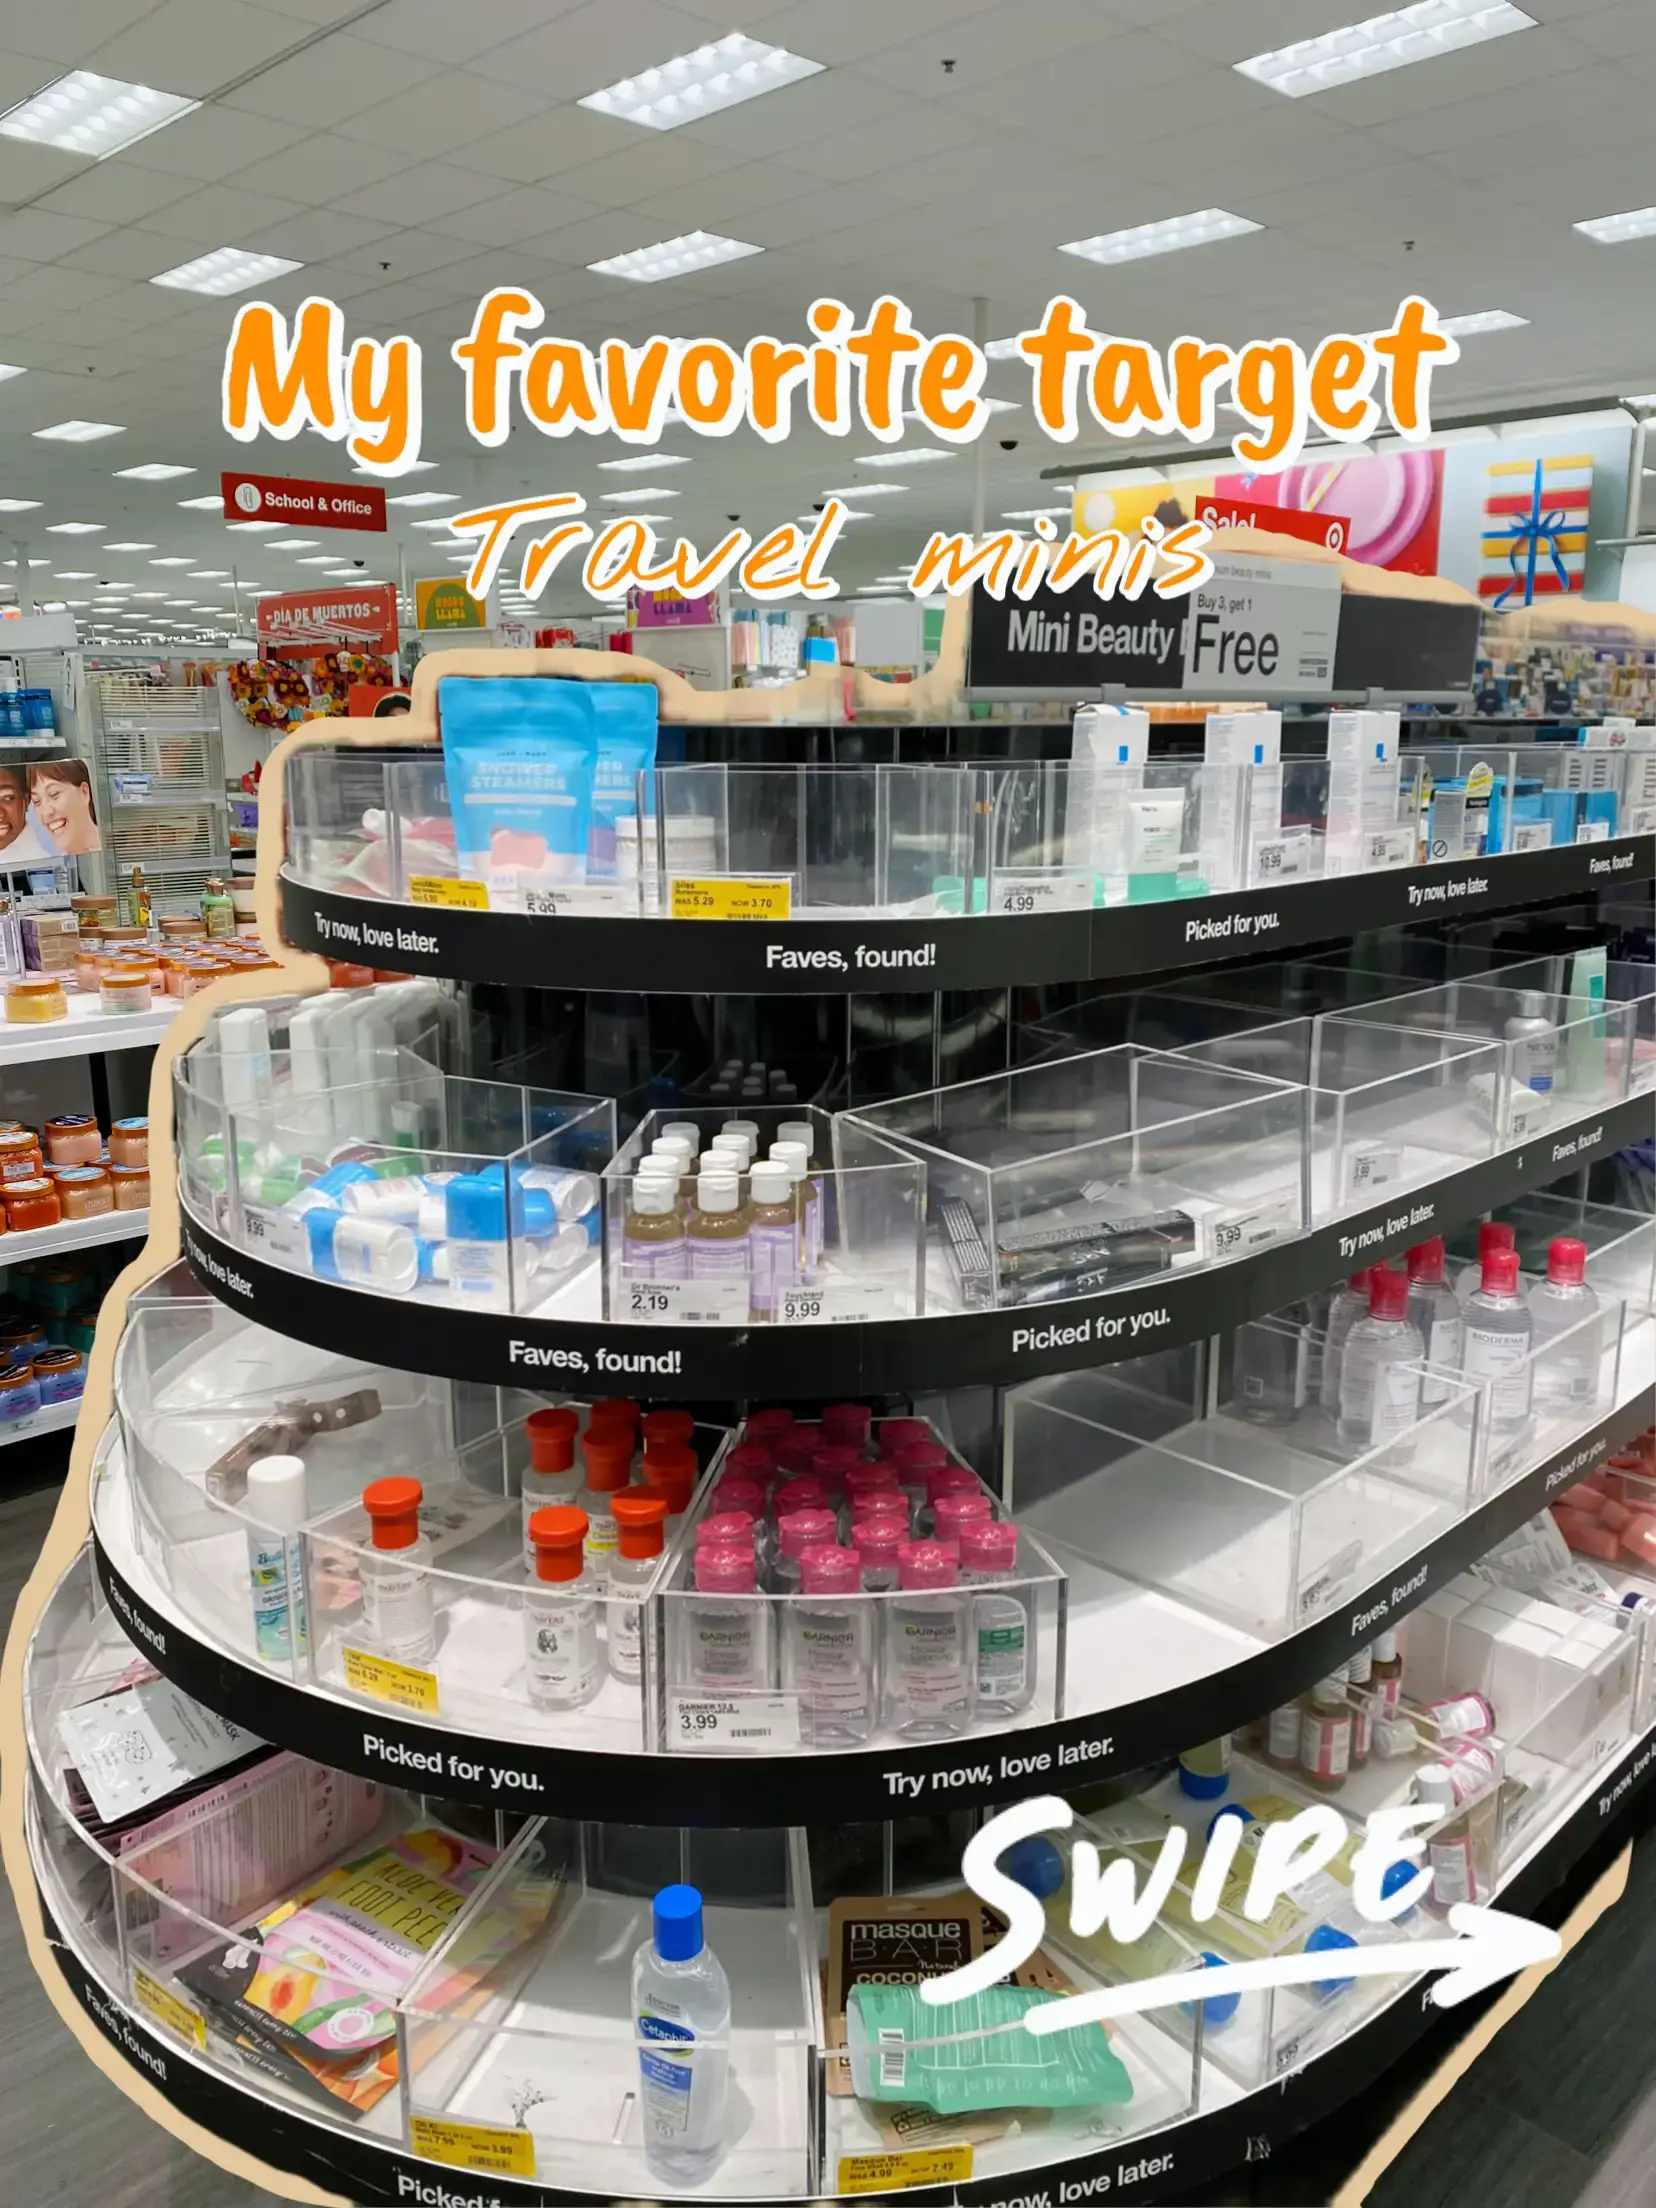 My favorite target travel minis✨, Gallery posted by Brie